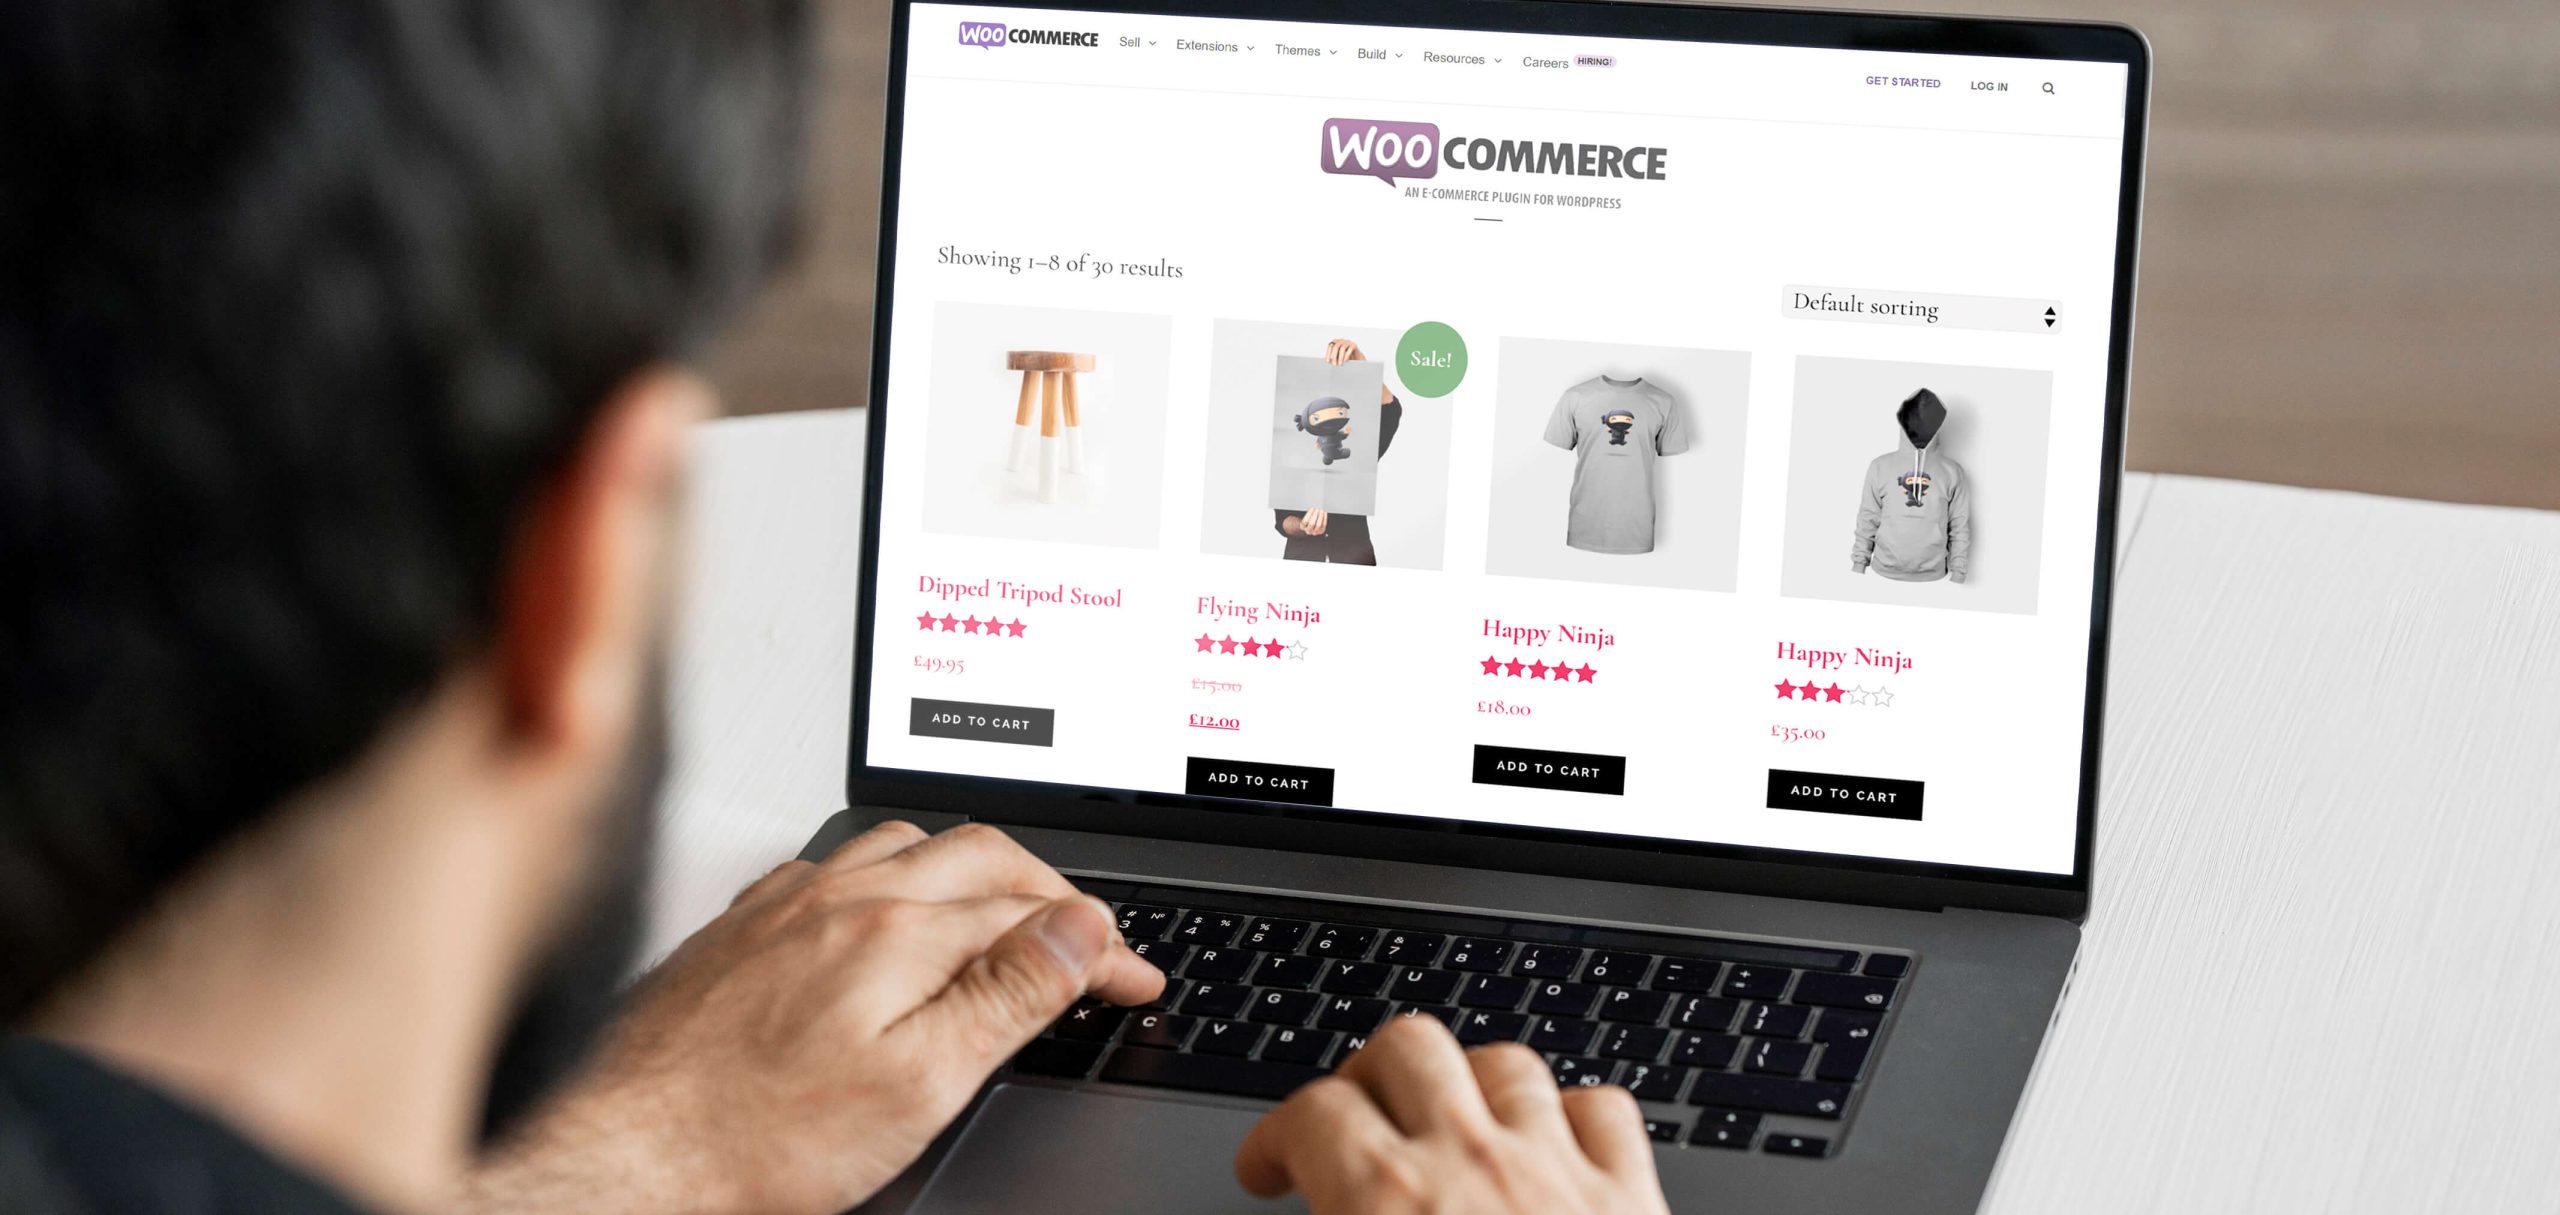 WooCommerce: Is it the Right Platform for Your eCommerce Site?